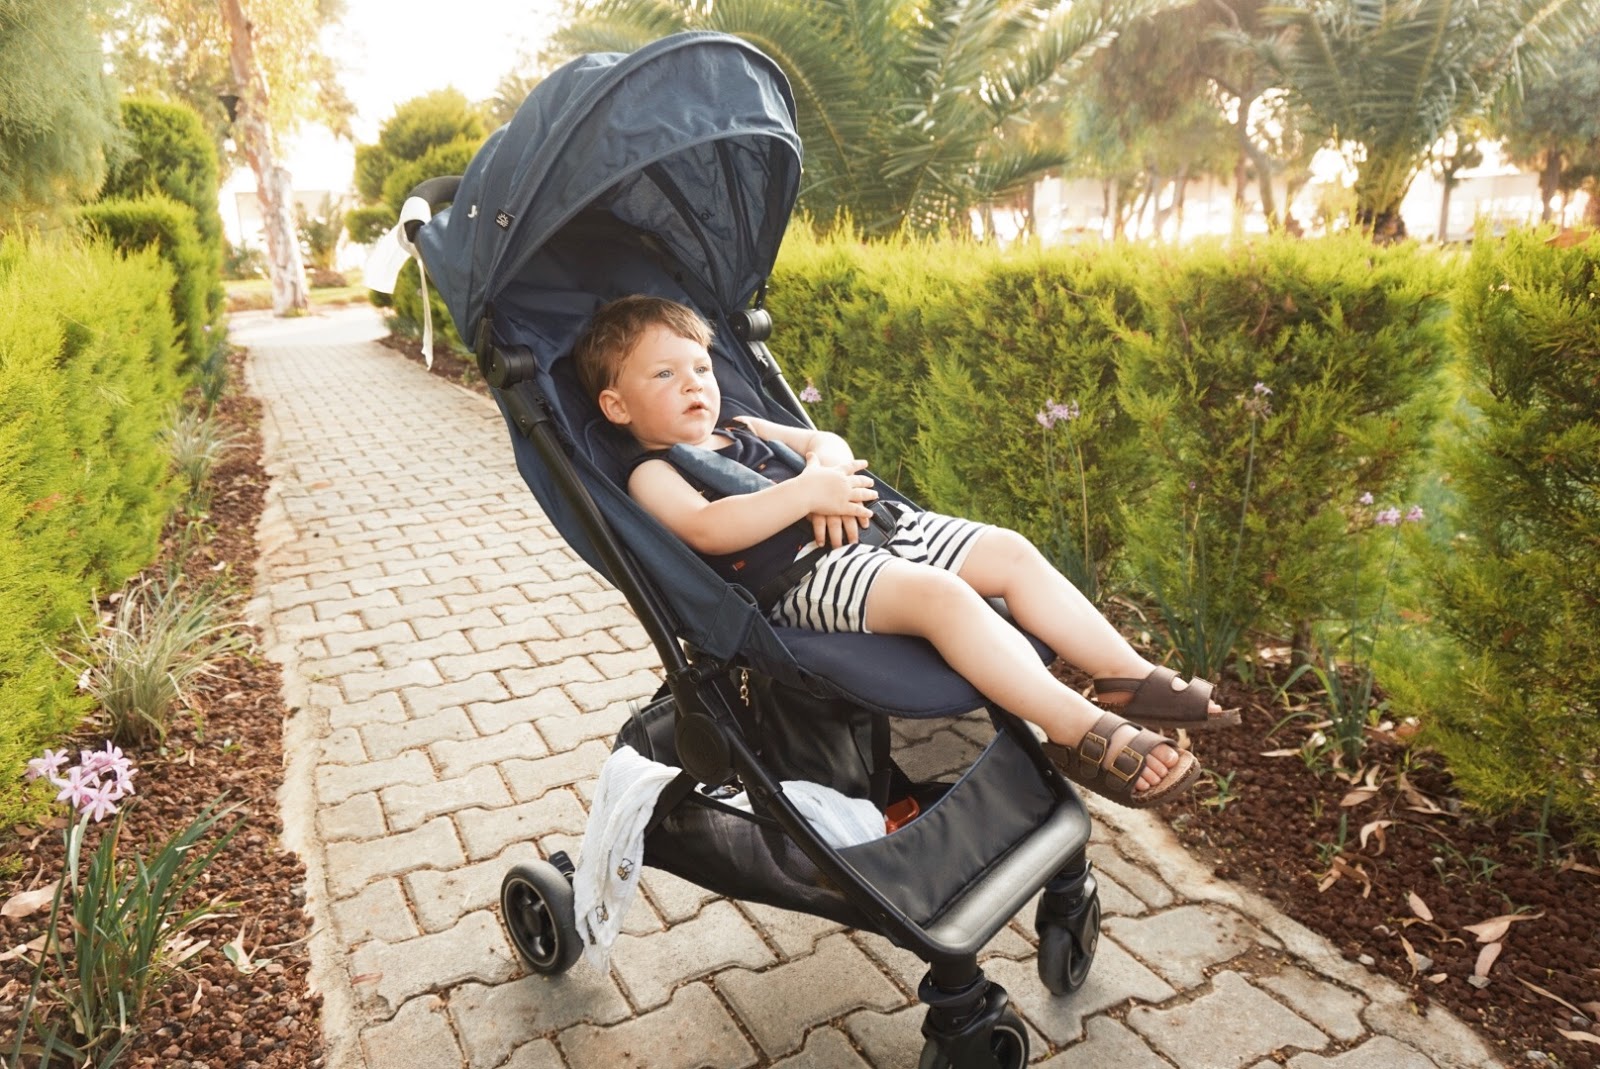 joie pact travel system review